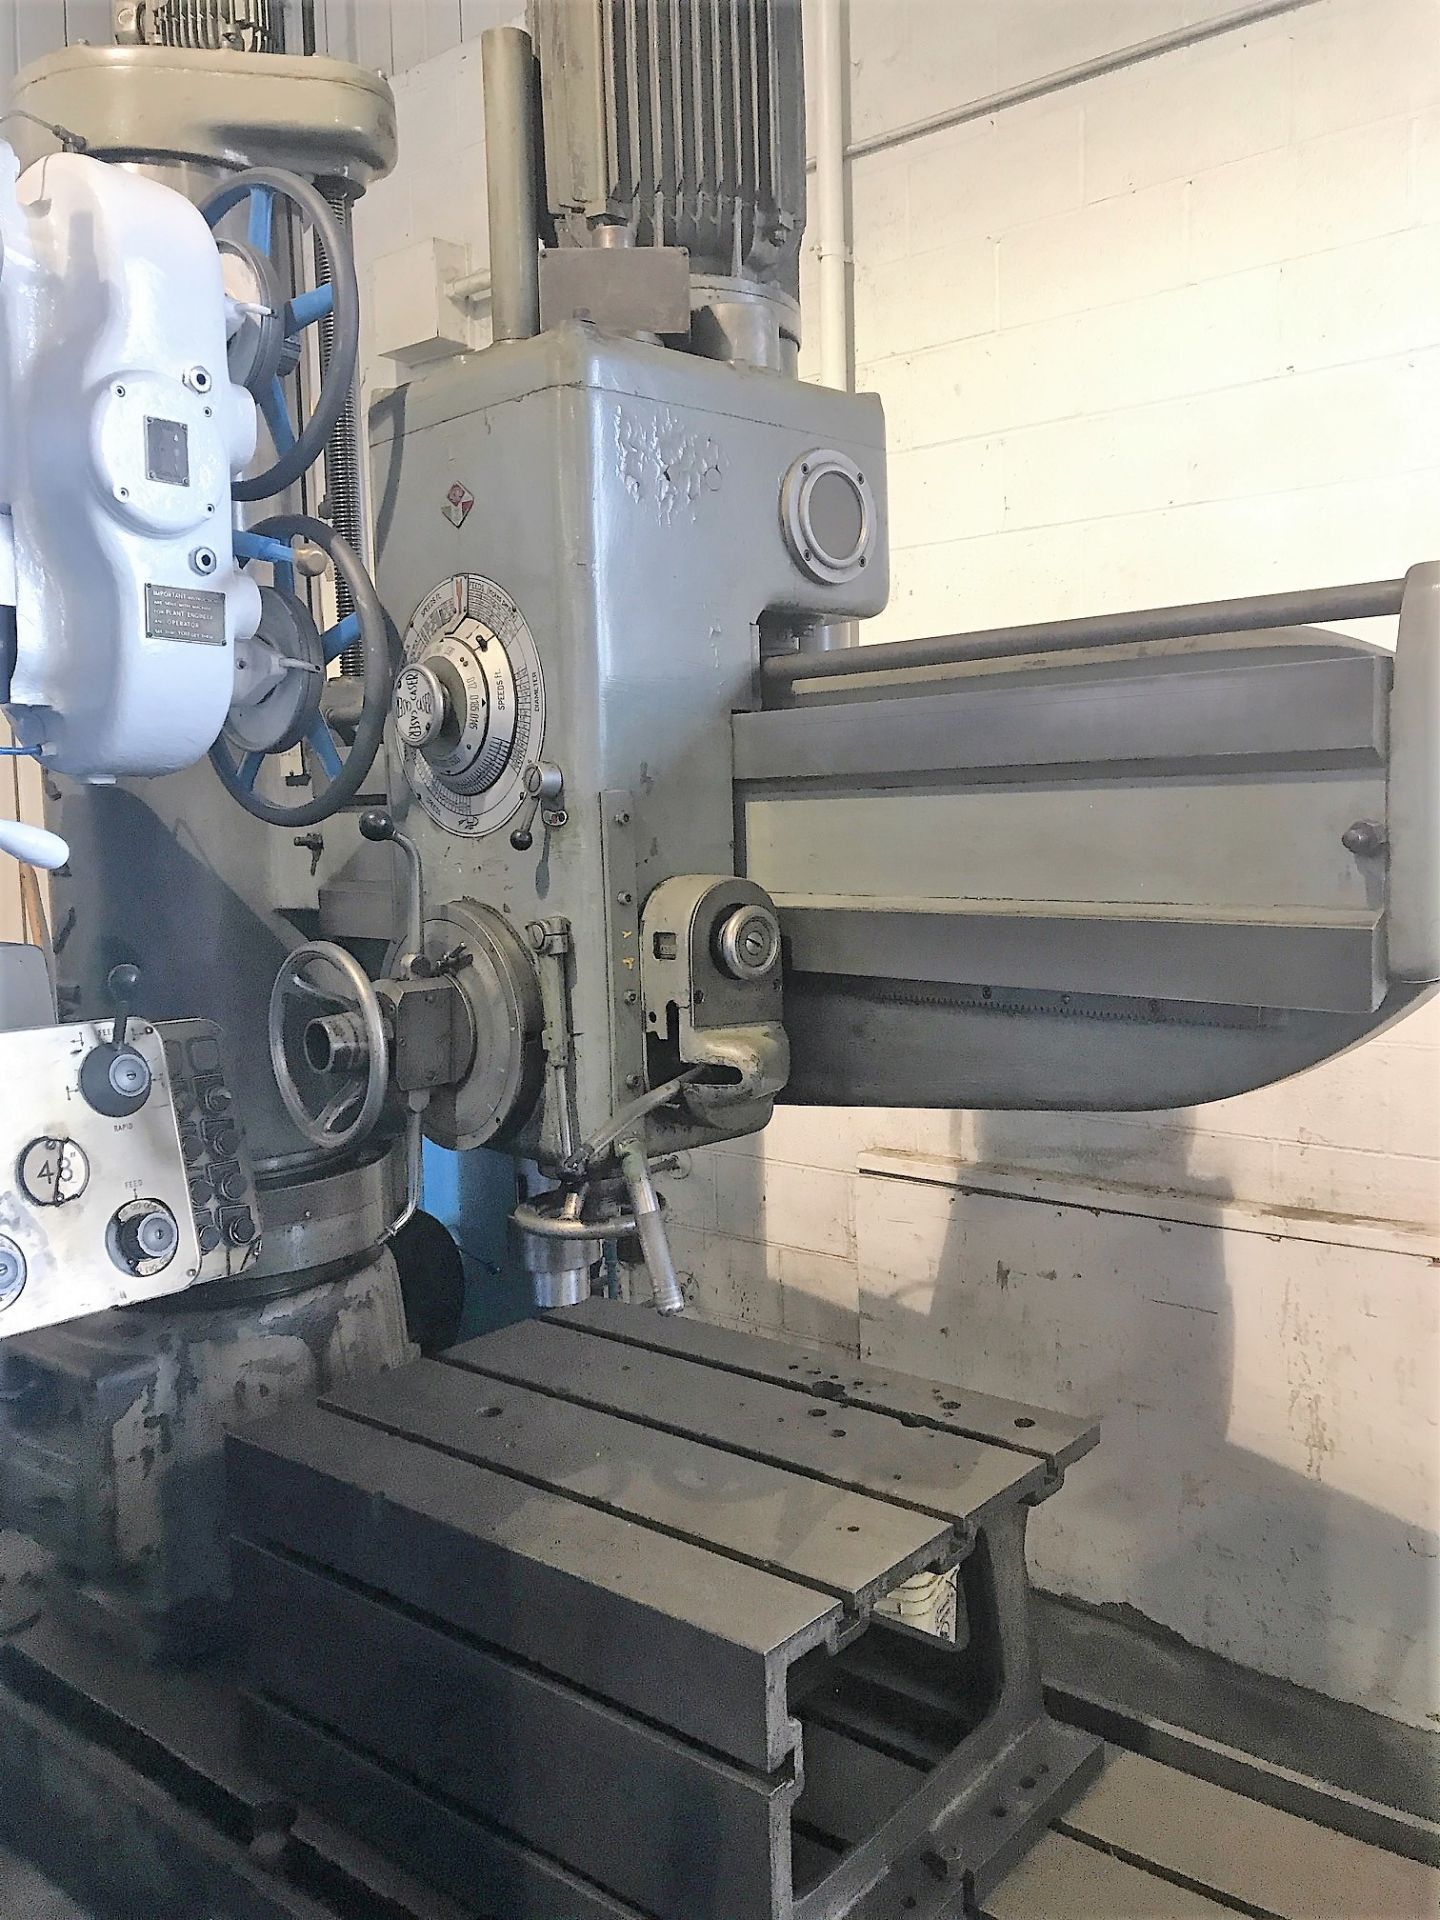 5’X19” CASER RADIAL DRILL, BOX TABLE - MADE IN ITALY - Image 2 of 6